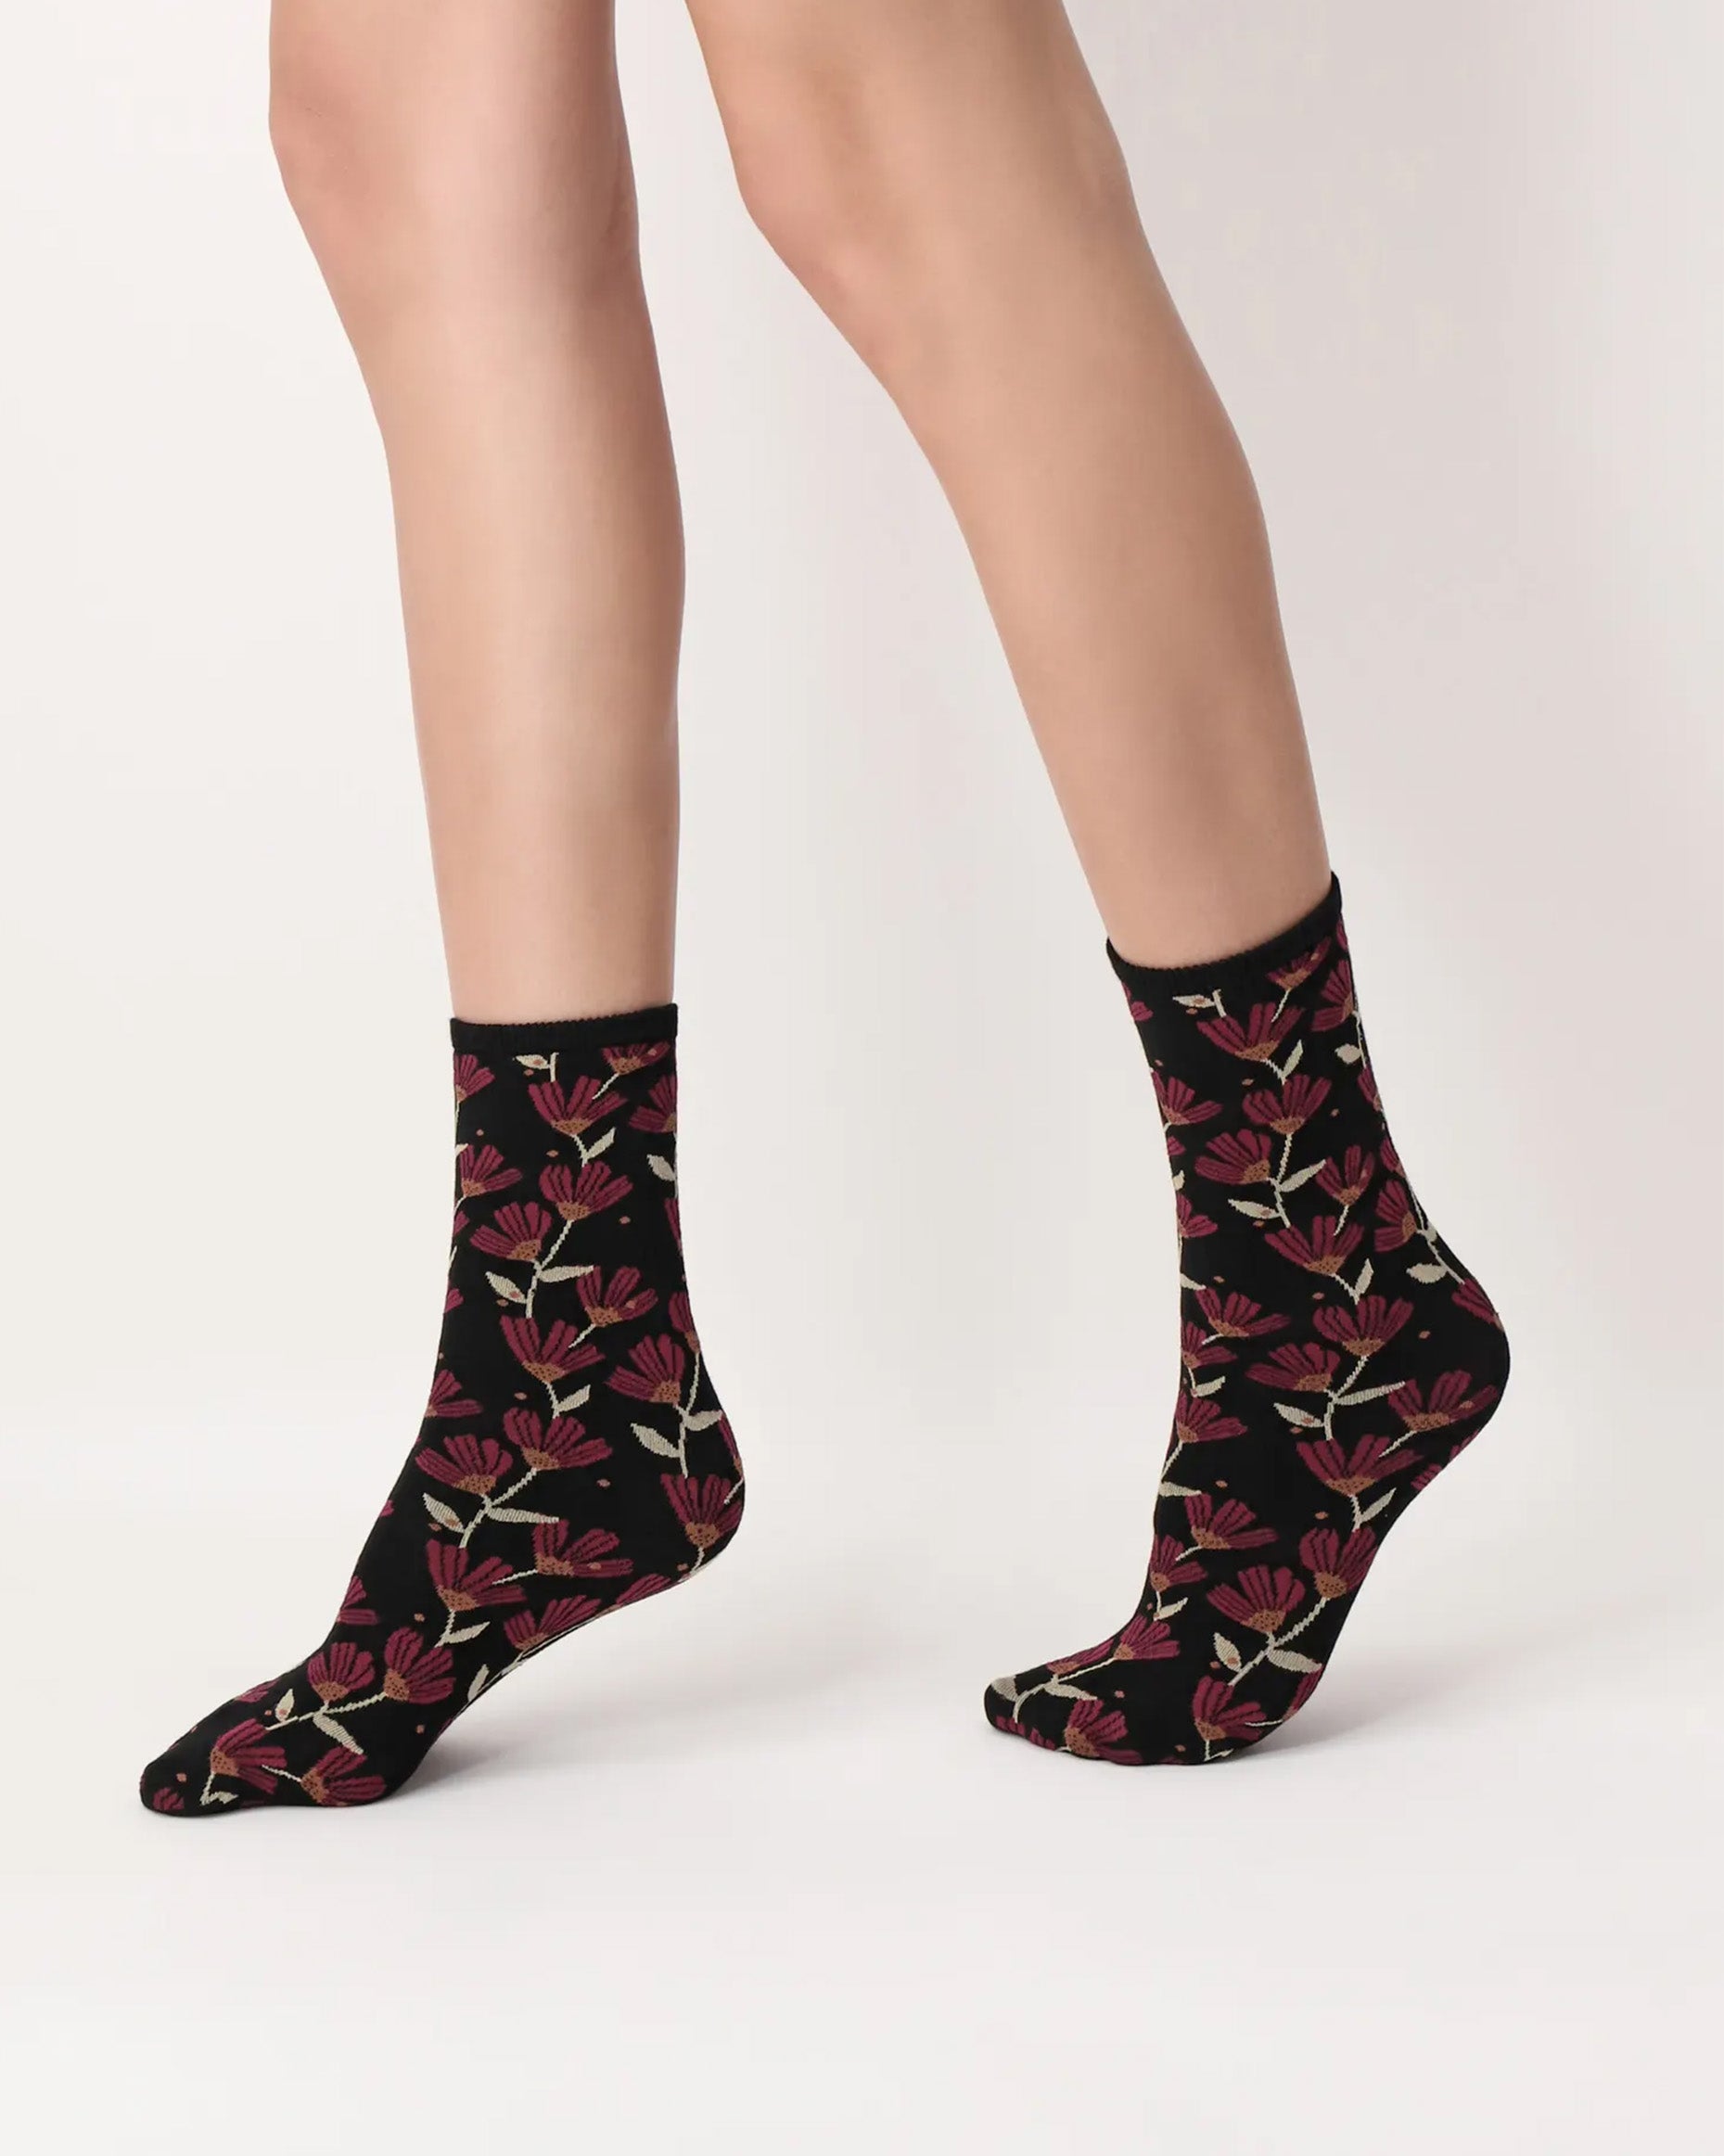 Oroblù Bloom Sock - Black viscose mix fashion ankle socks with an all over woven floral pattern in wine, rusty orange and cream.